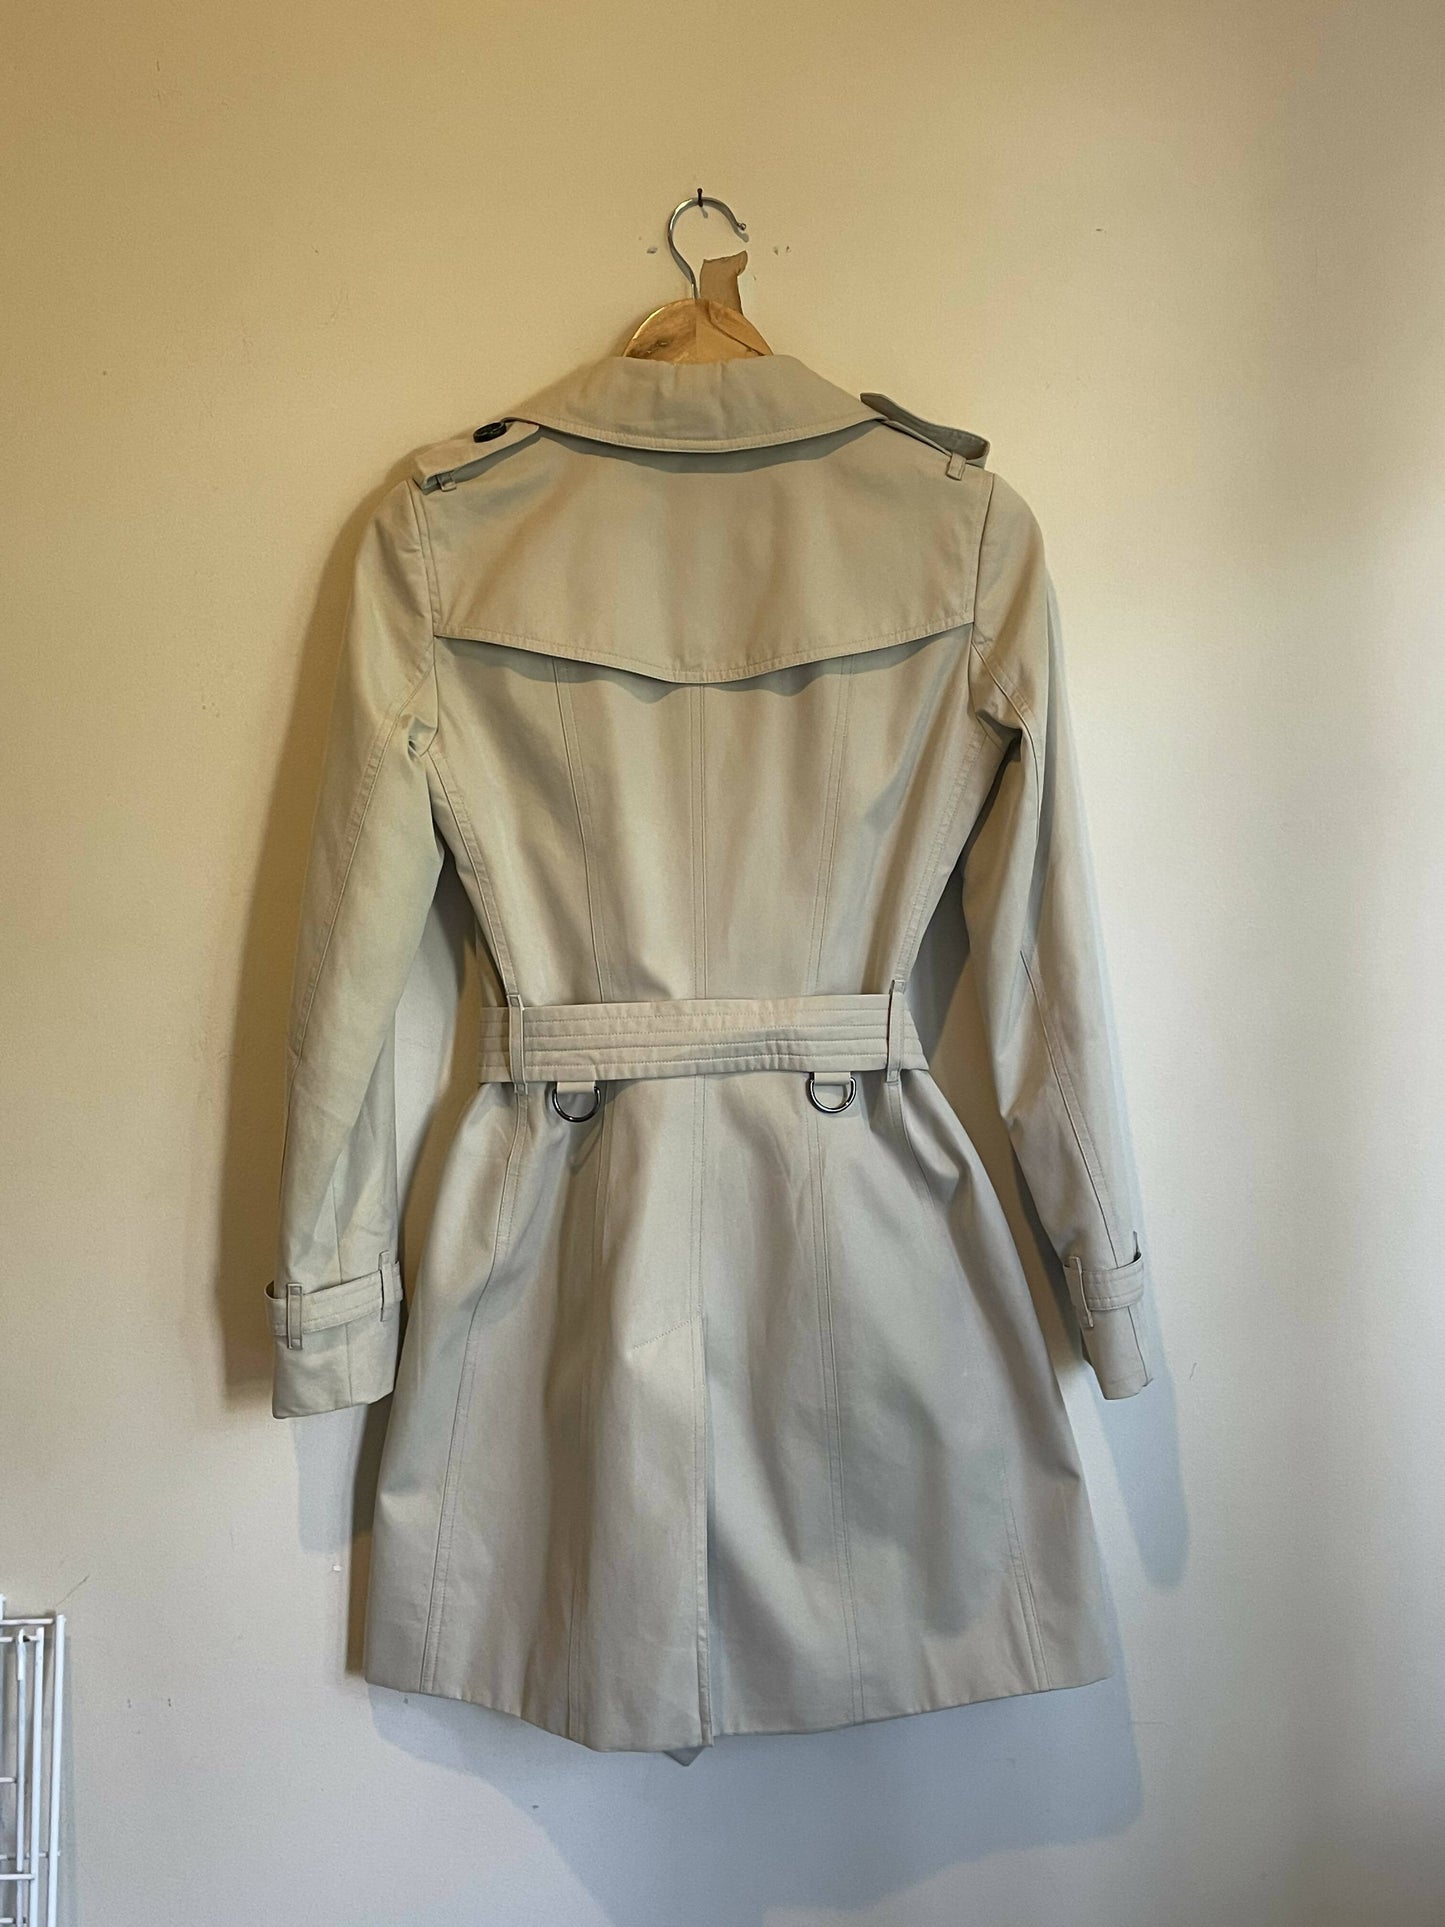 Burberry - Mid-length Chelsea Heritage Trench Coat UK Size 6